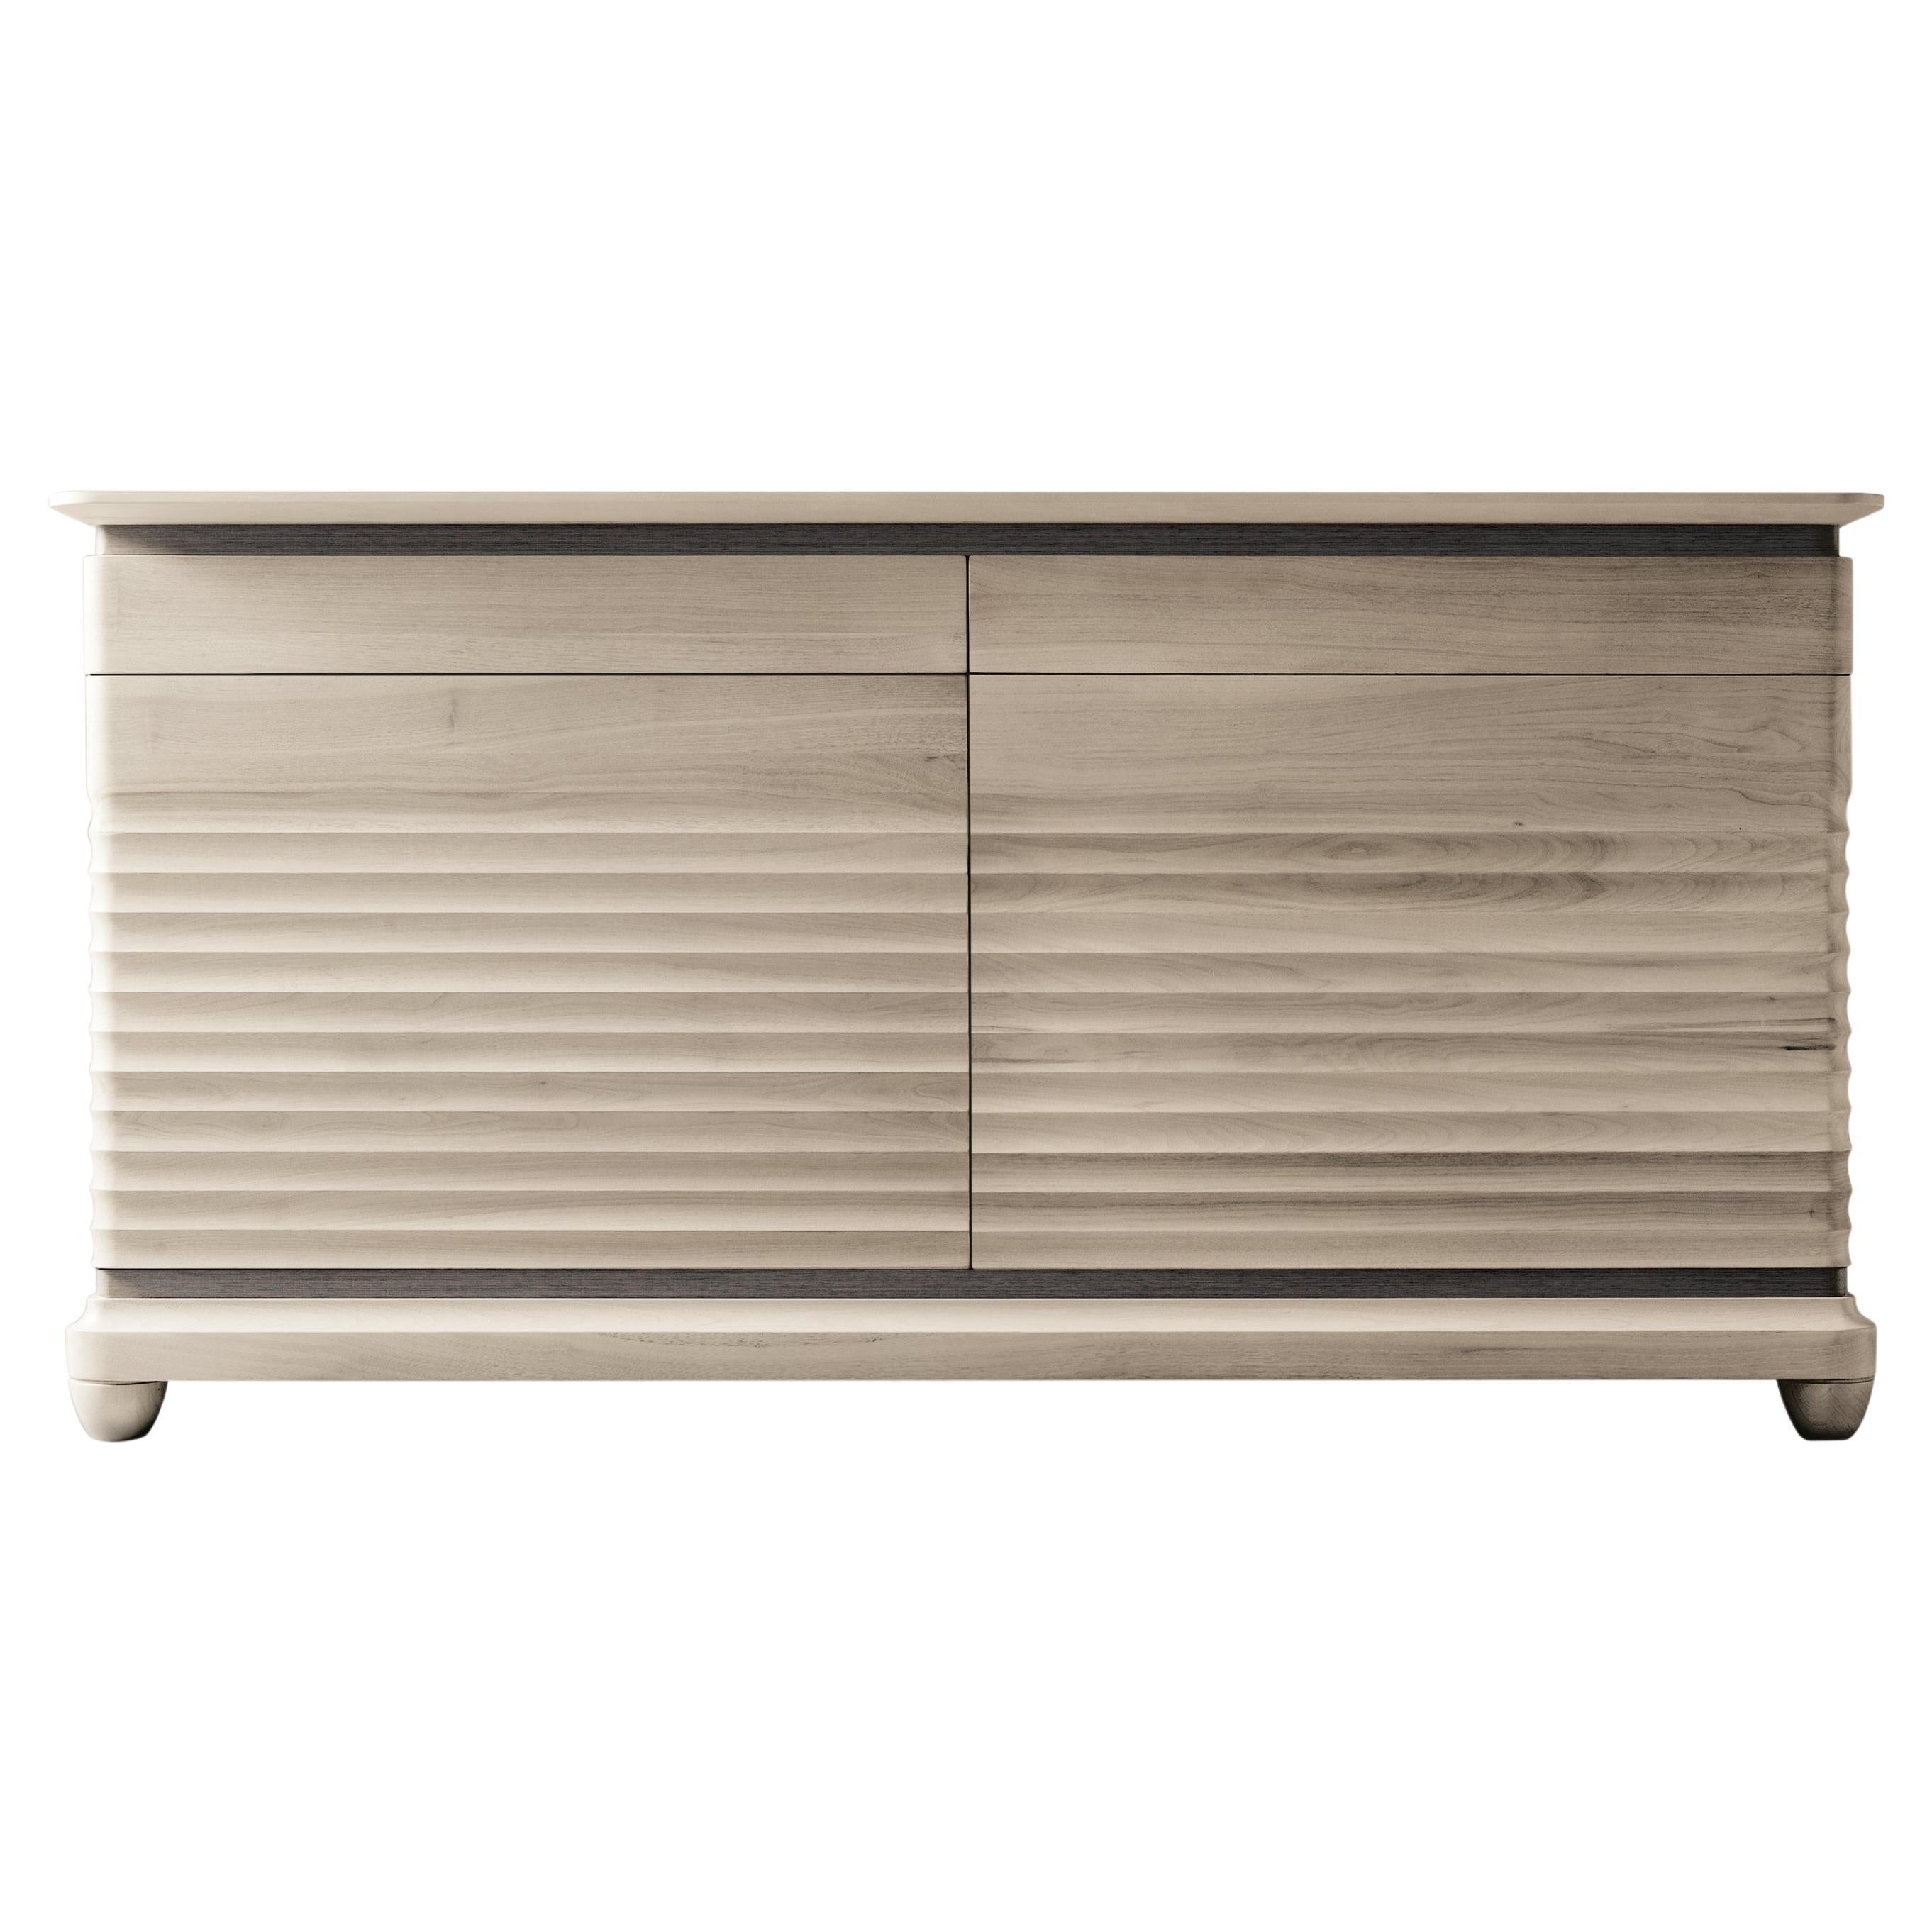 Traccia Solid Wood Sideboard, Walnut in Natural Grey Finish, Contemporary For Sale